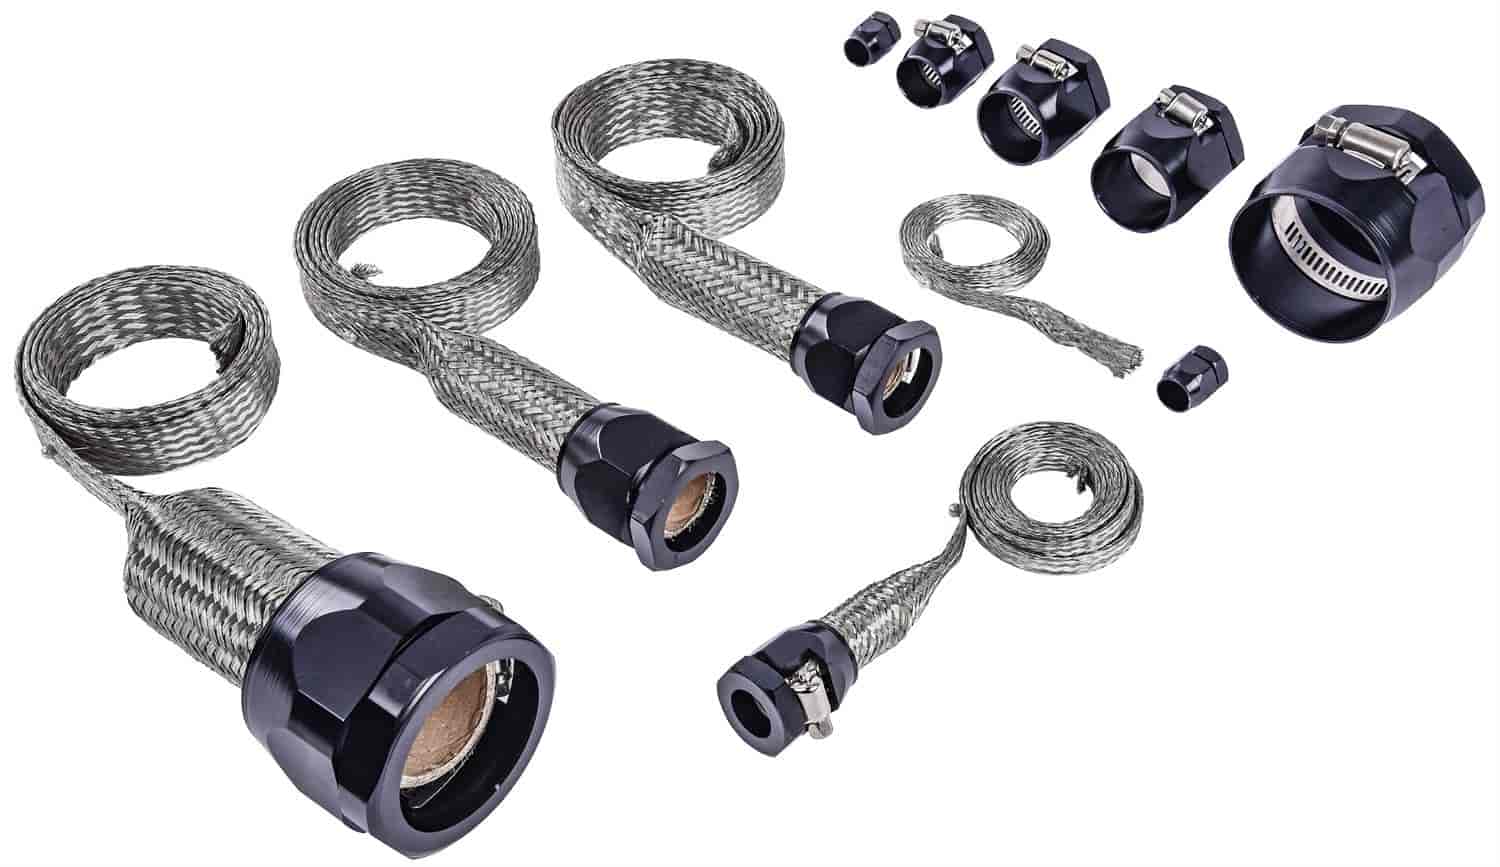 Braided Hose Sleeving Kit with Clamps [Black Hose Clamp Covers]